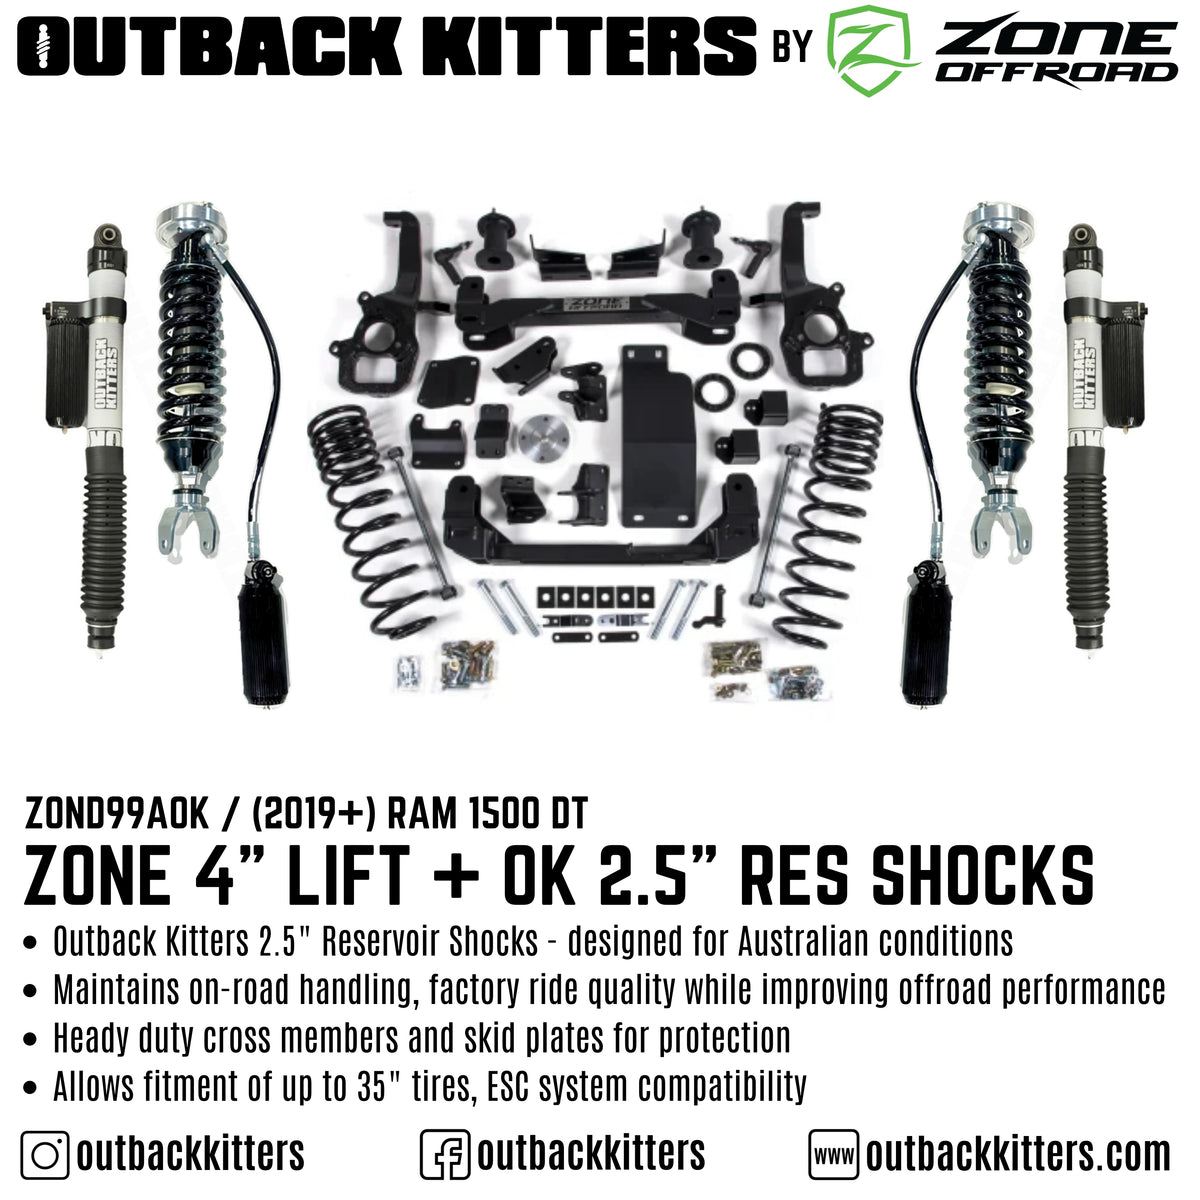 OK by Zone Offroad 4" Lift Kit for 2019+ Ram 1500 DT - Outback Kitters